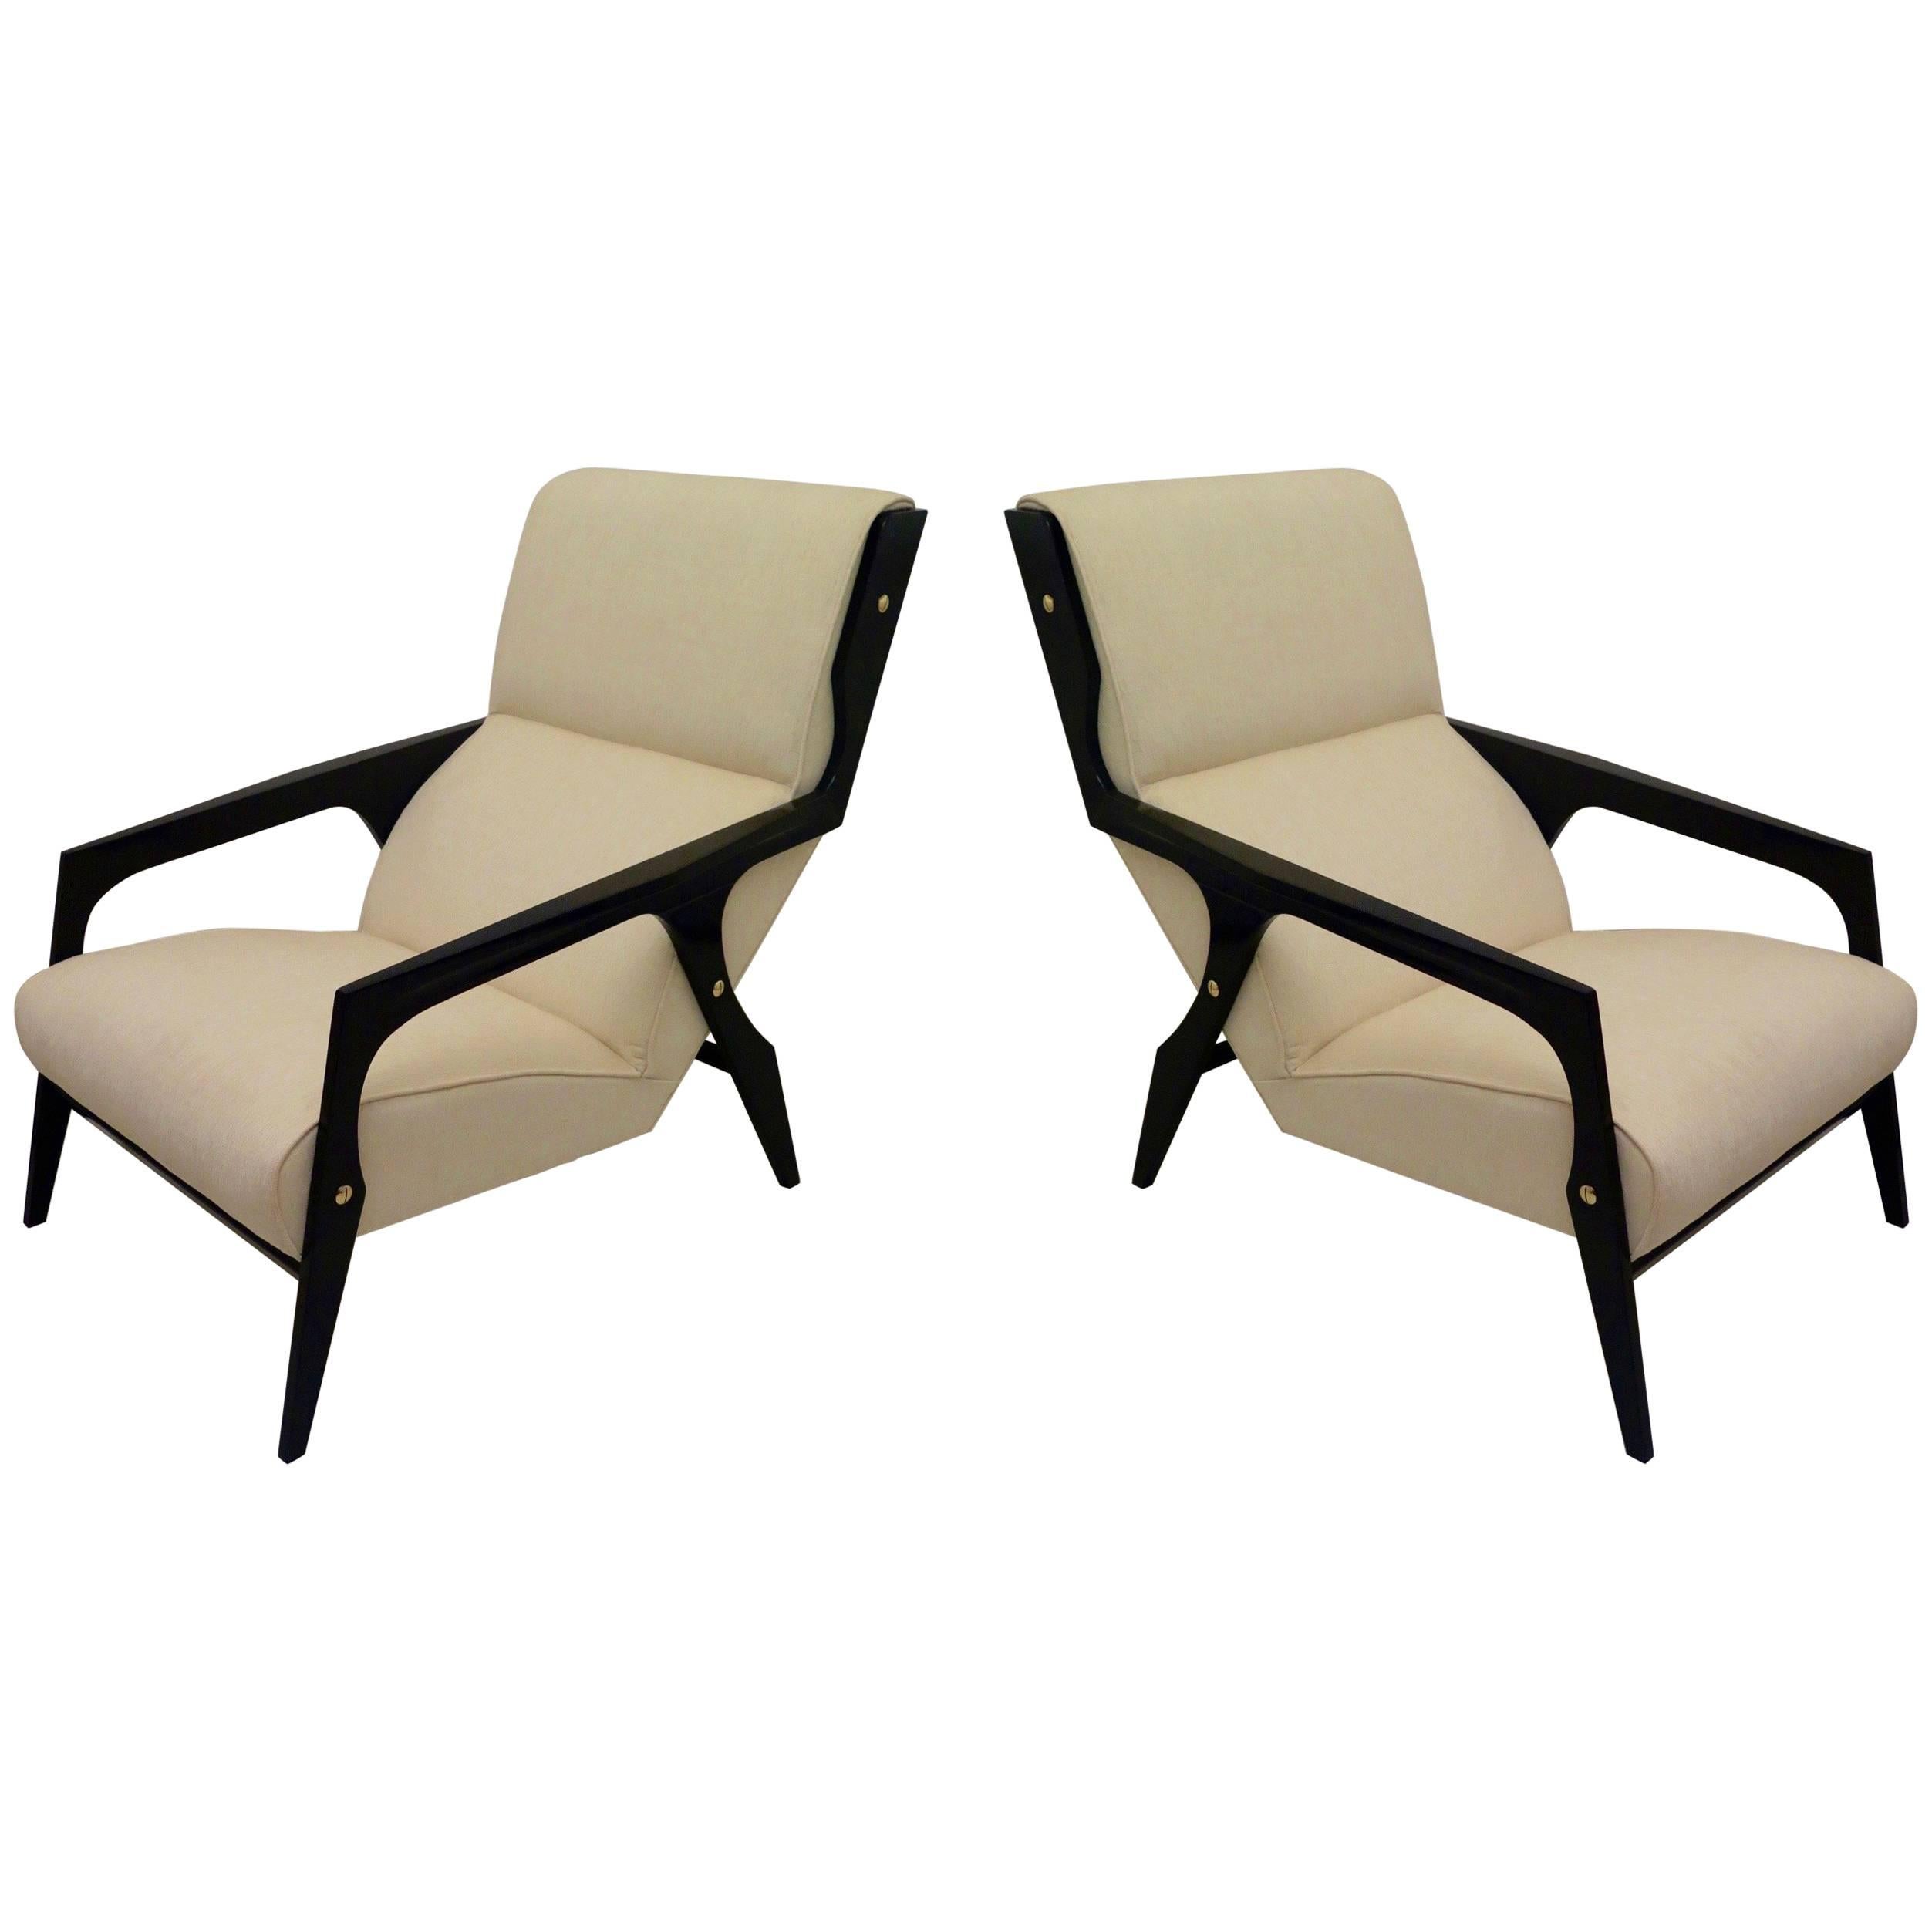 Pair of Midcentury Wood and Fabric Black and White Armchairs, 1950